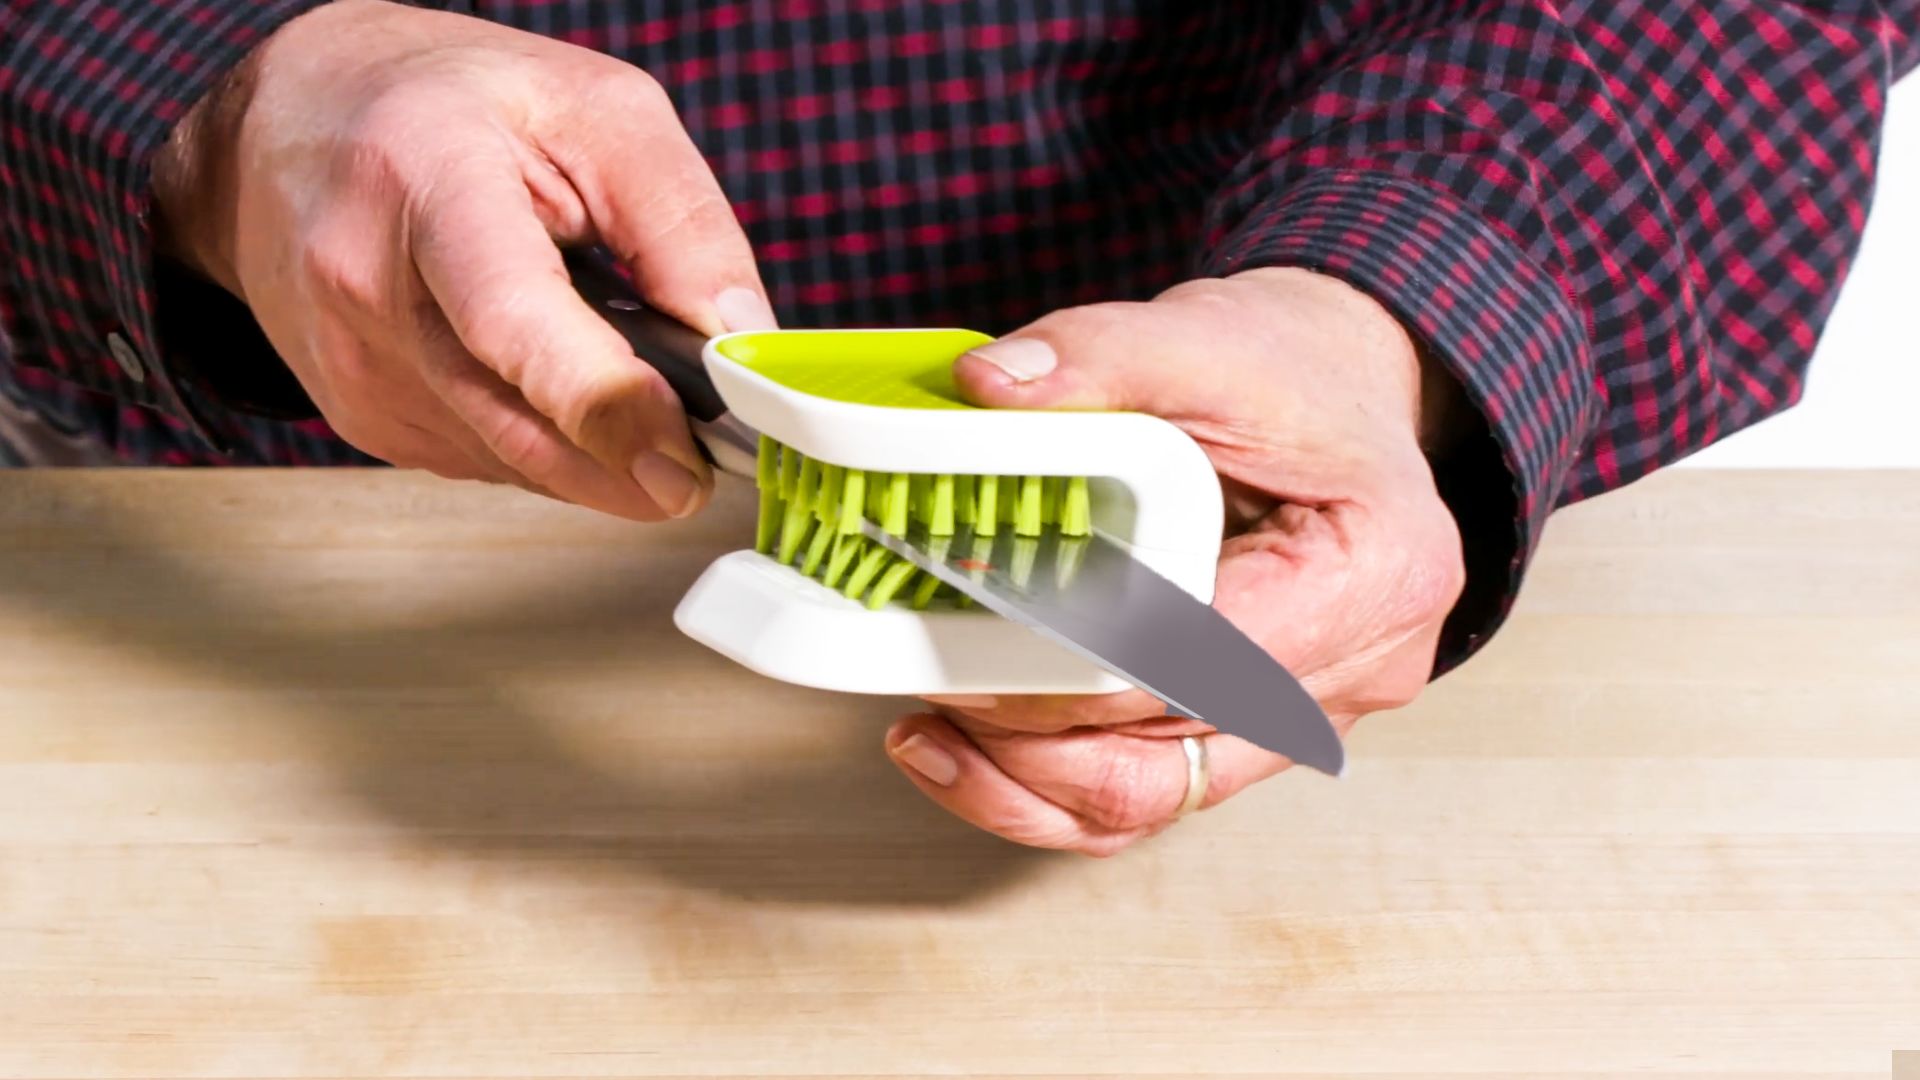 Watch 5 Cleaning Kitchen Gadgets Tested By Design Expert, Well Equipped